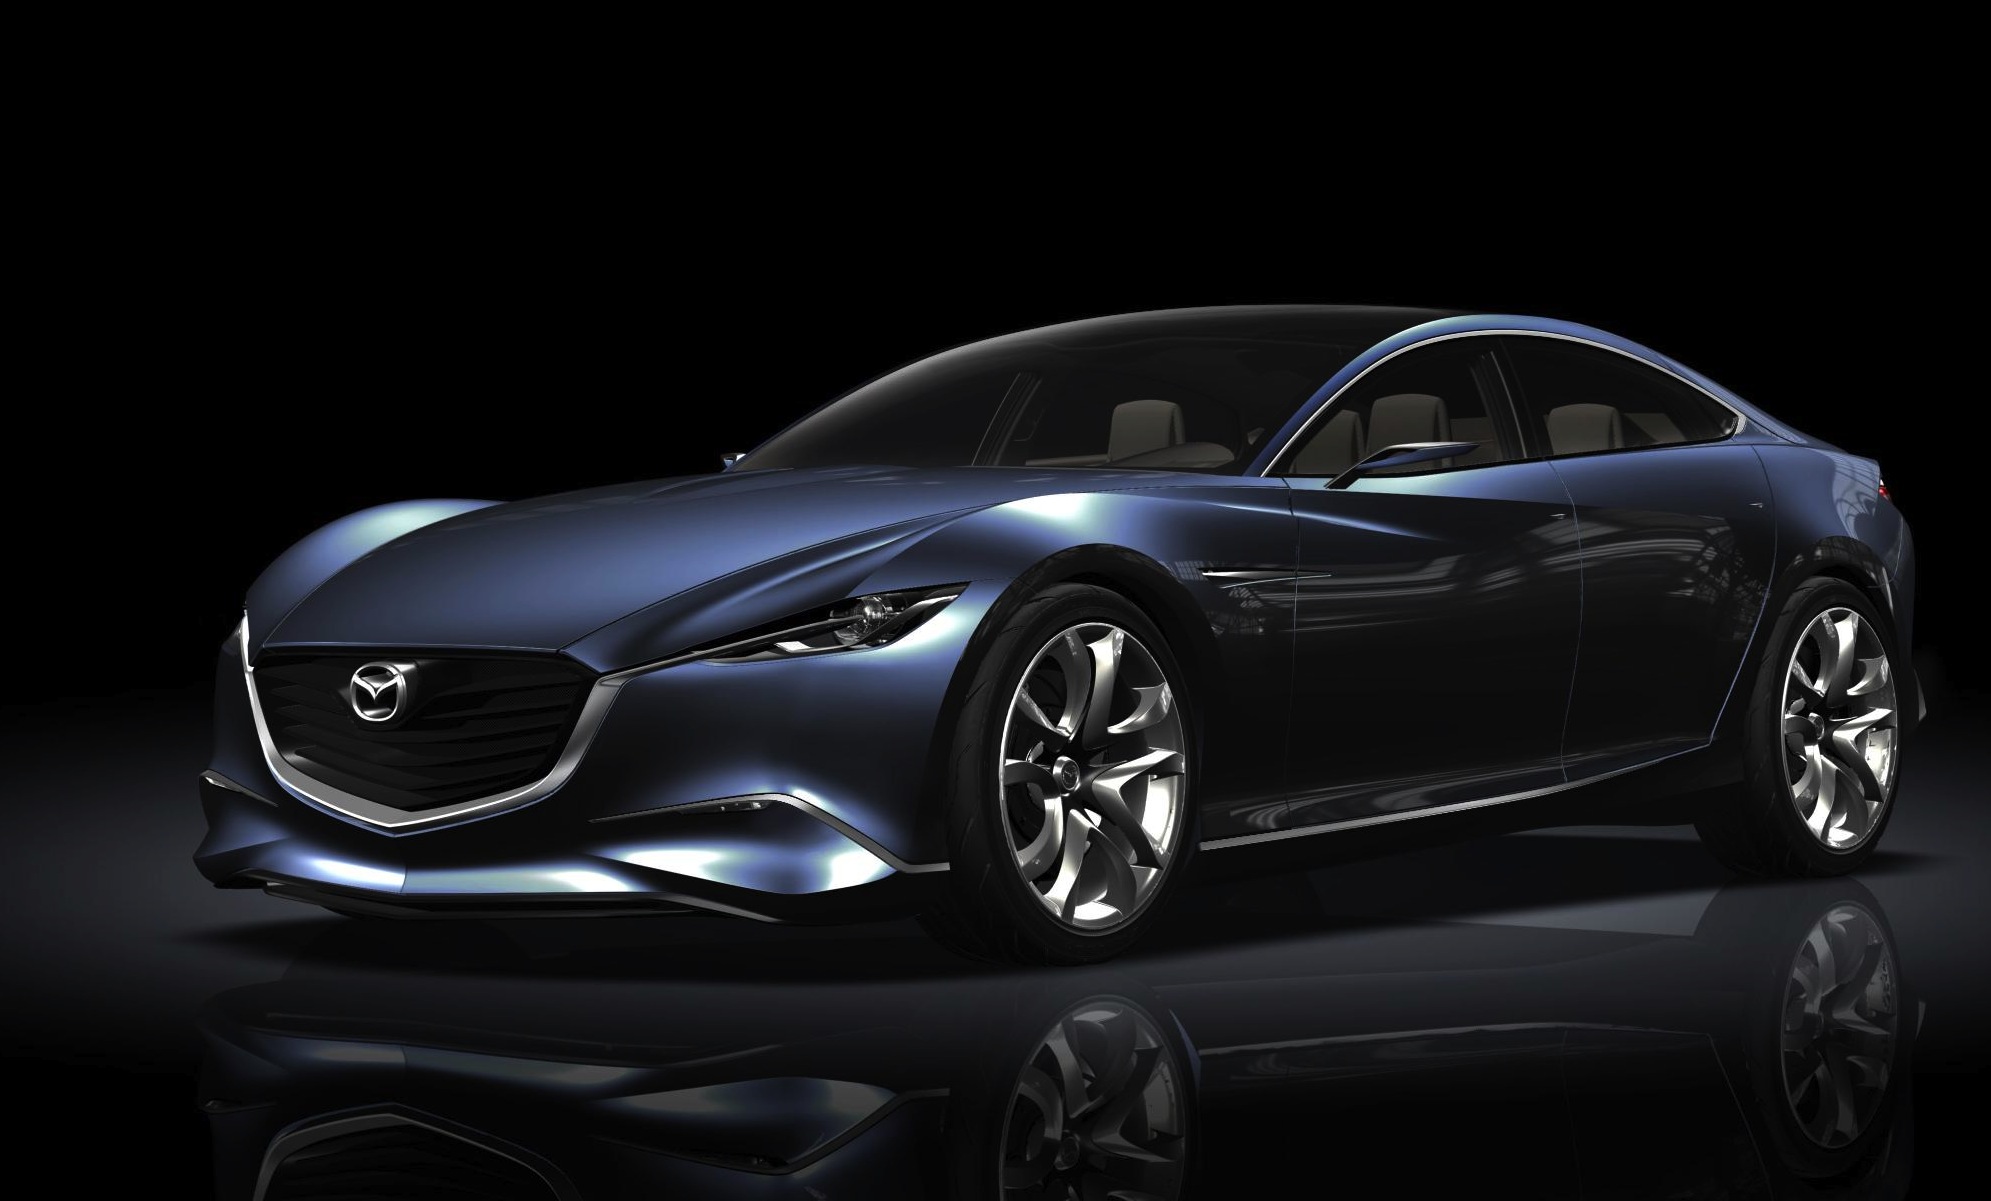 Next Mazda RX must use rotary engine, says design boss – report